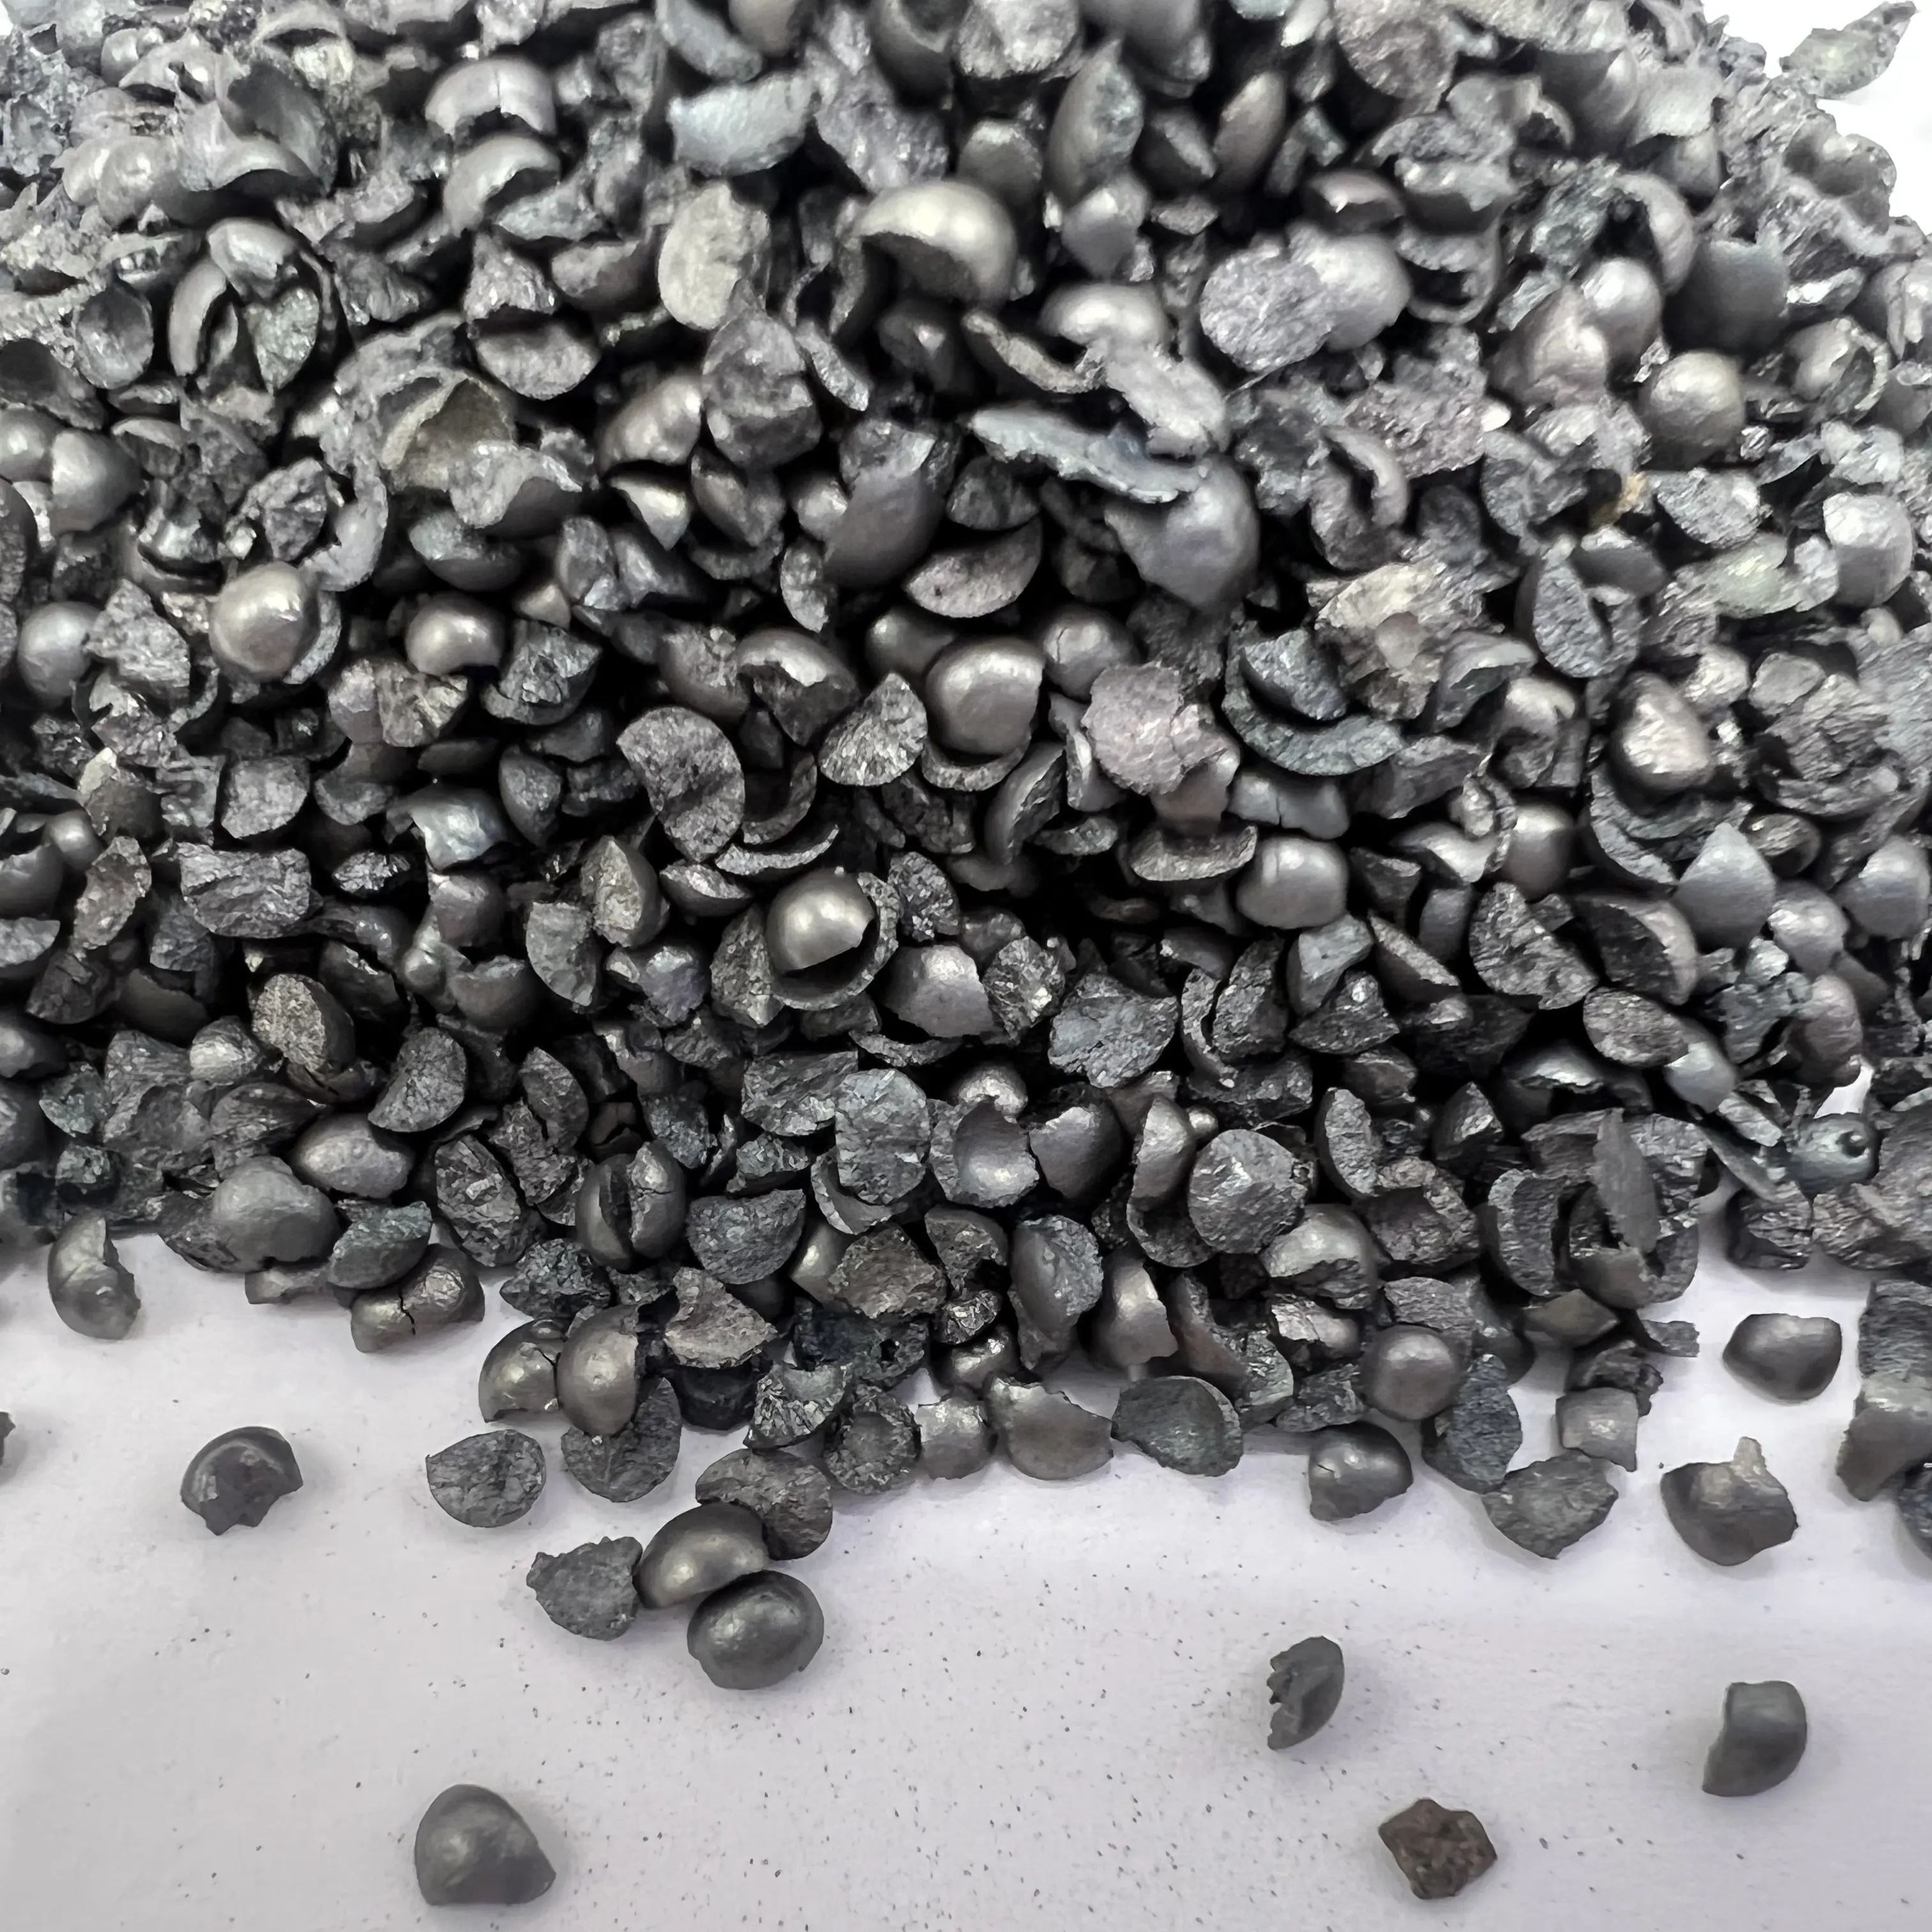 High Quality Steel Shot Steel Cut Wire Shot Grit For Polishing Blasting And Grinding Abrasives